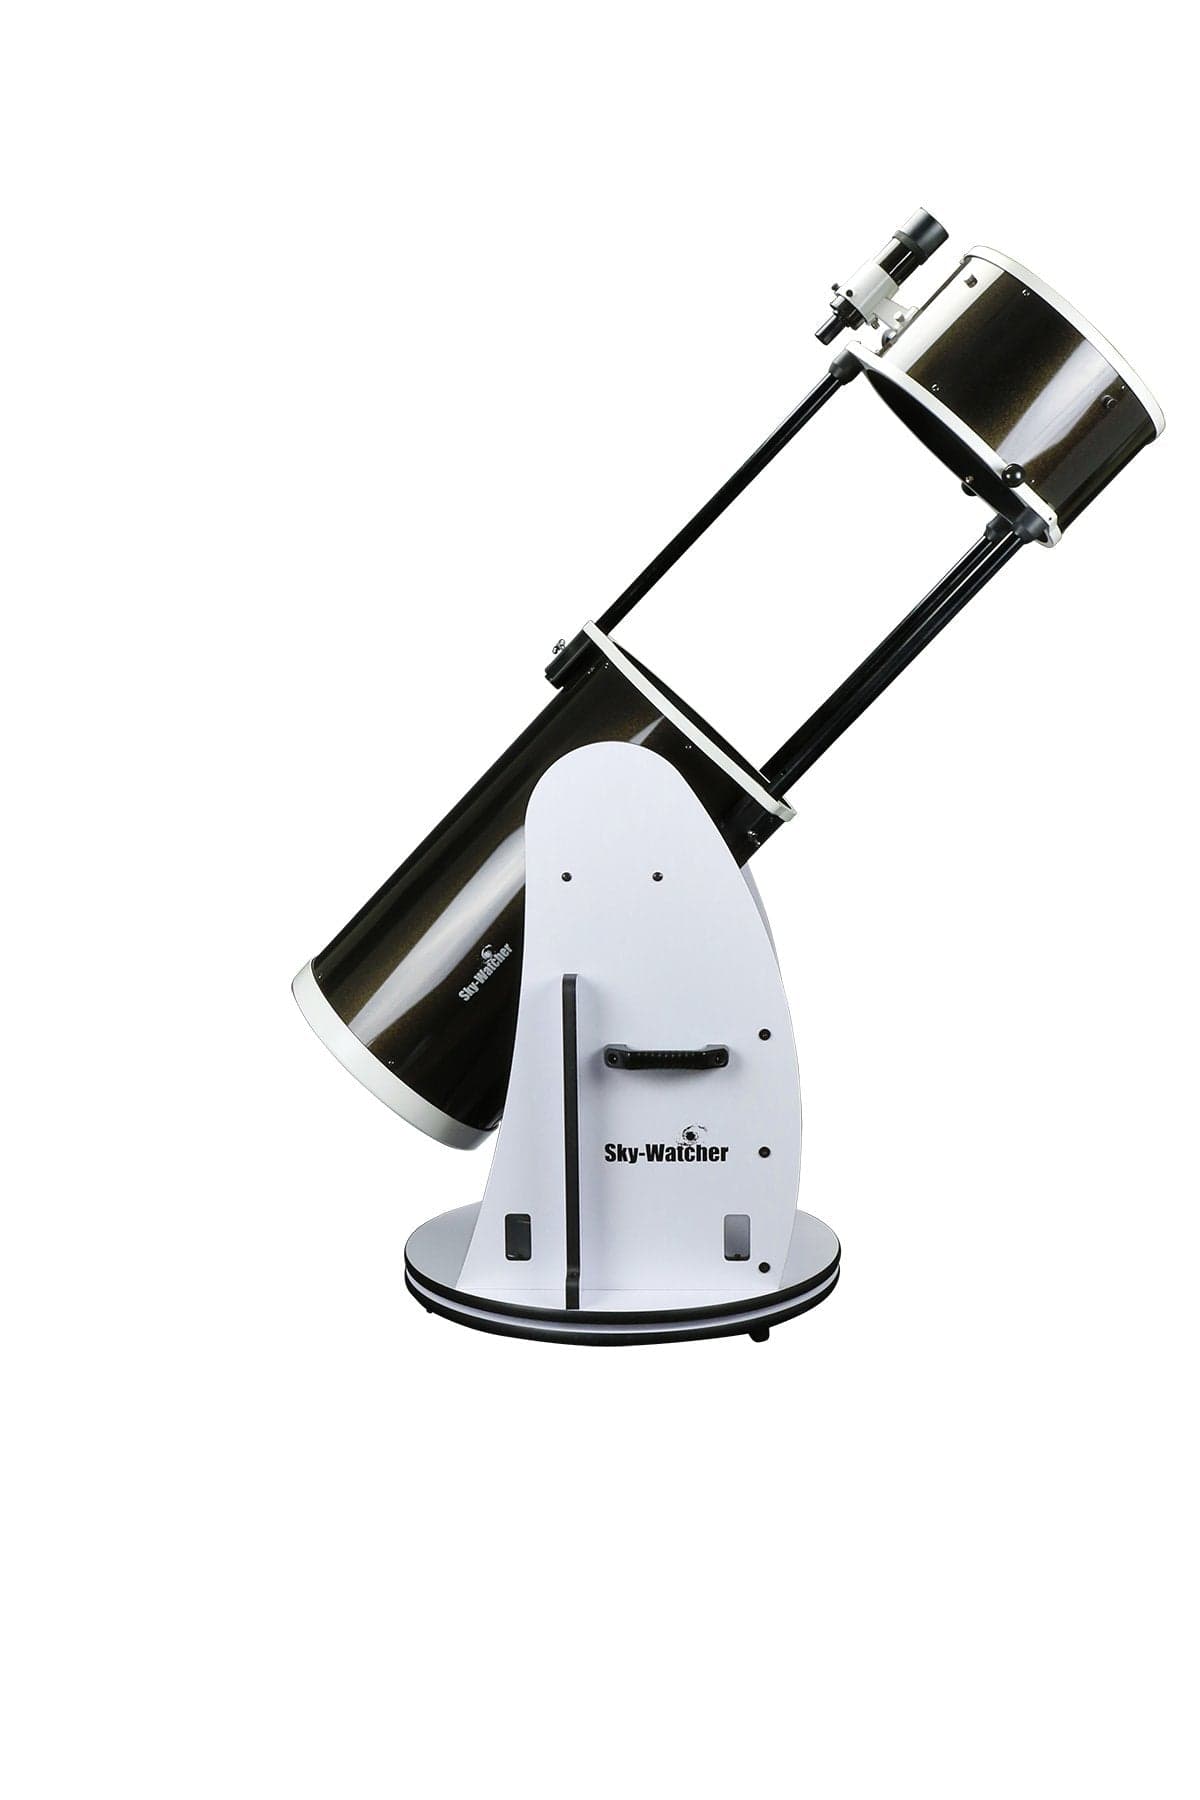 Sky-Watcher Flextube 300P 12 SynScan GoTo Collapsible Dobsonian